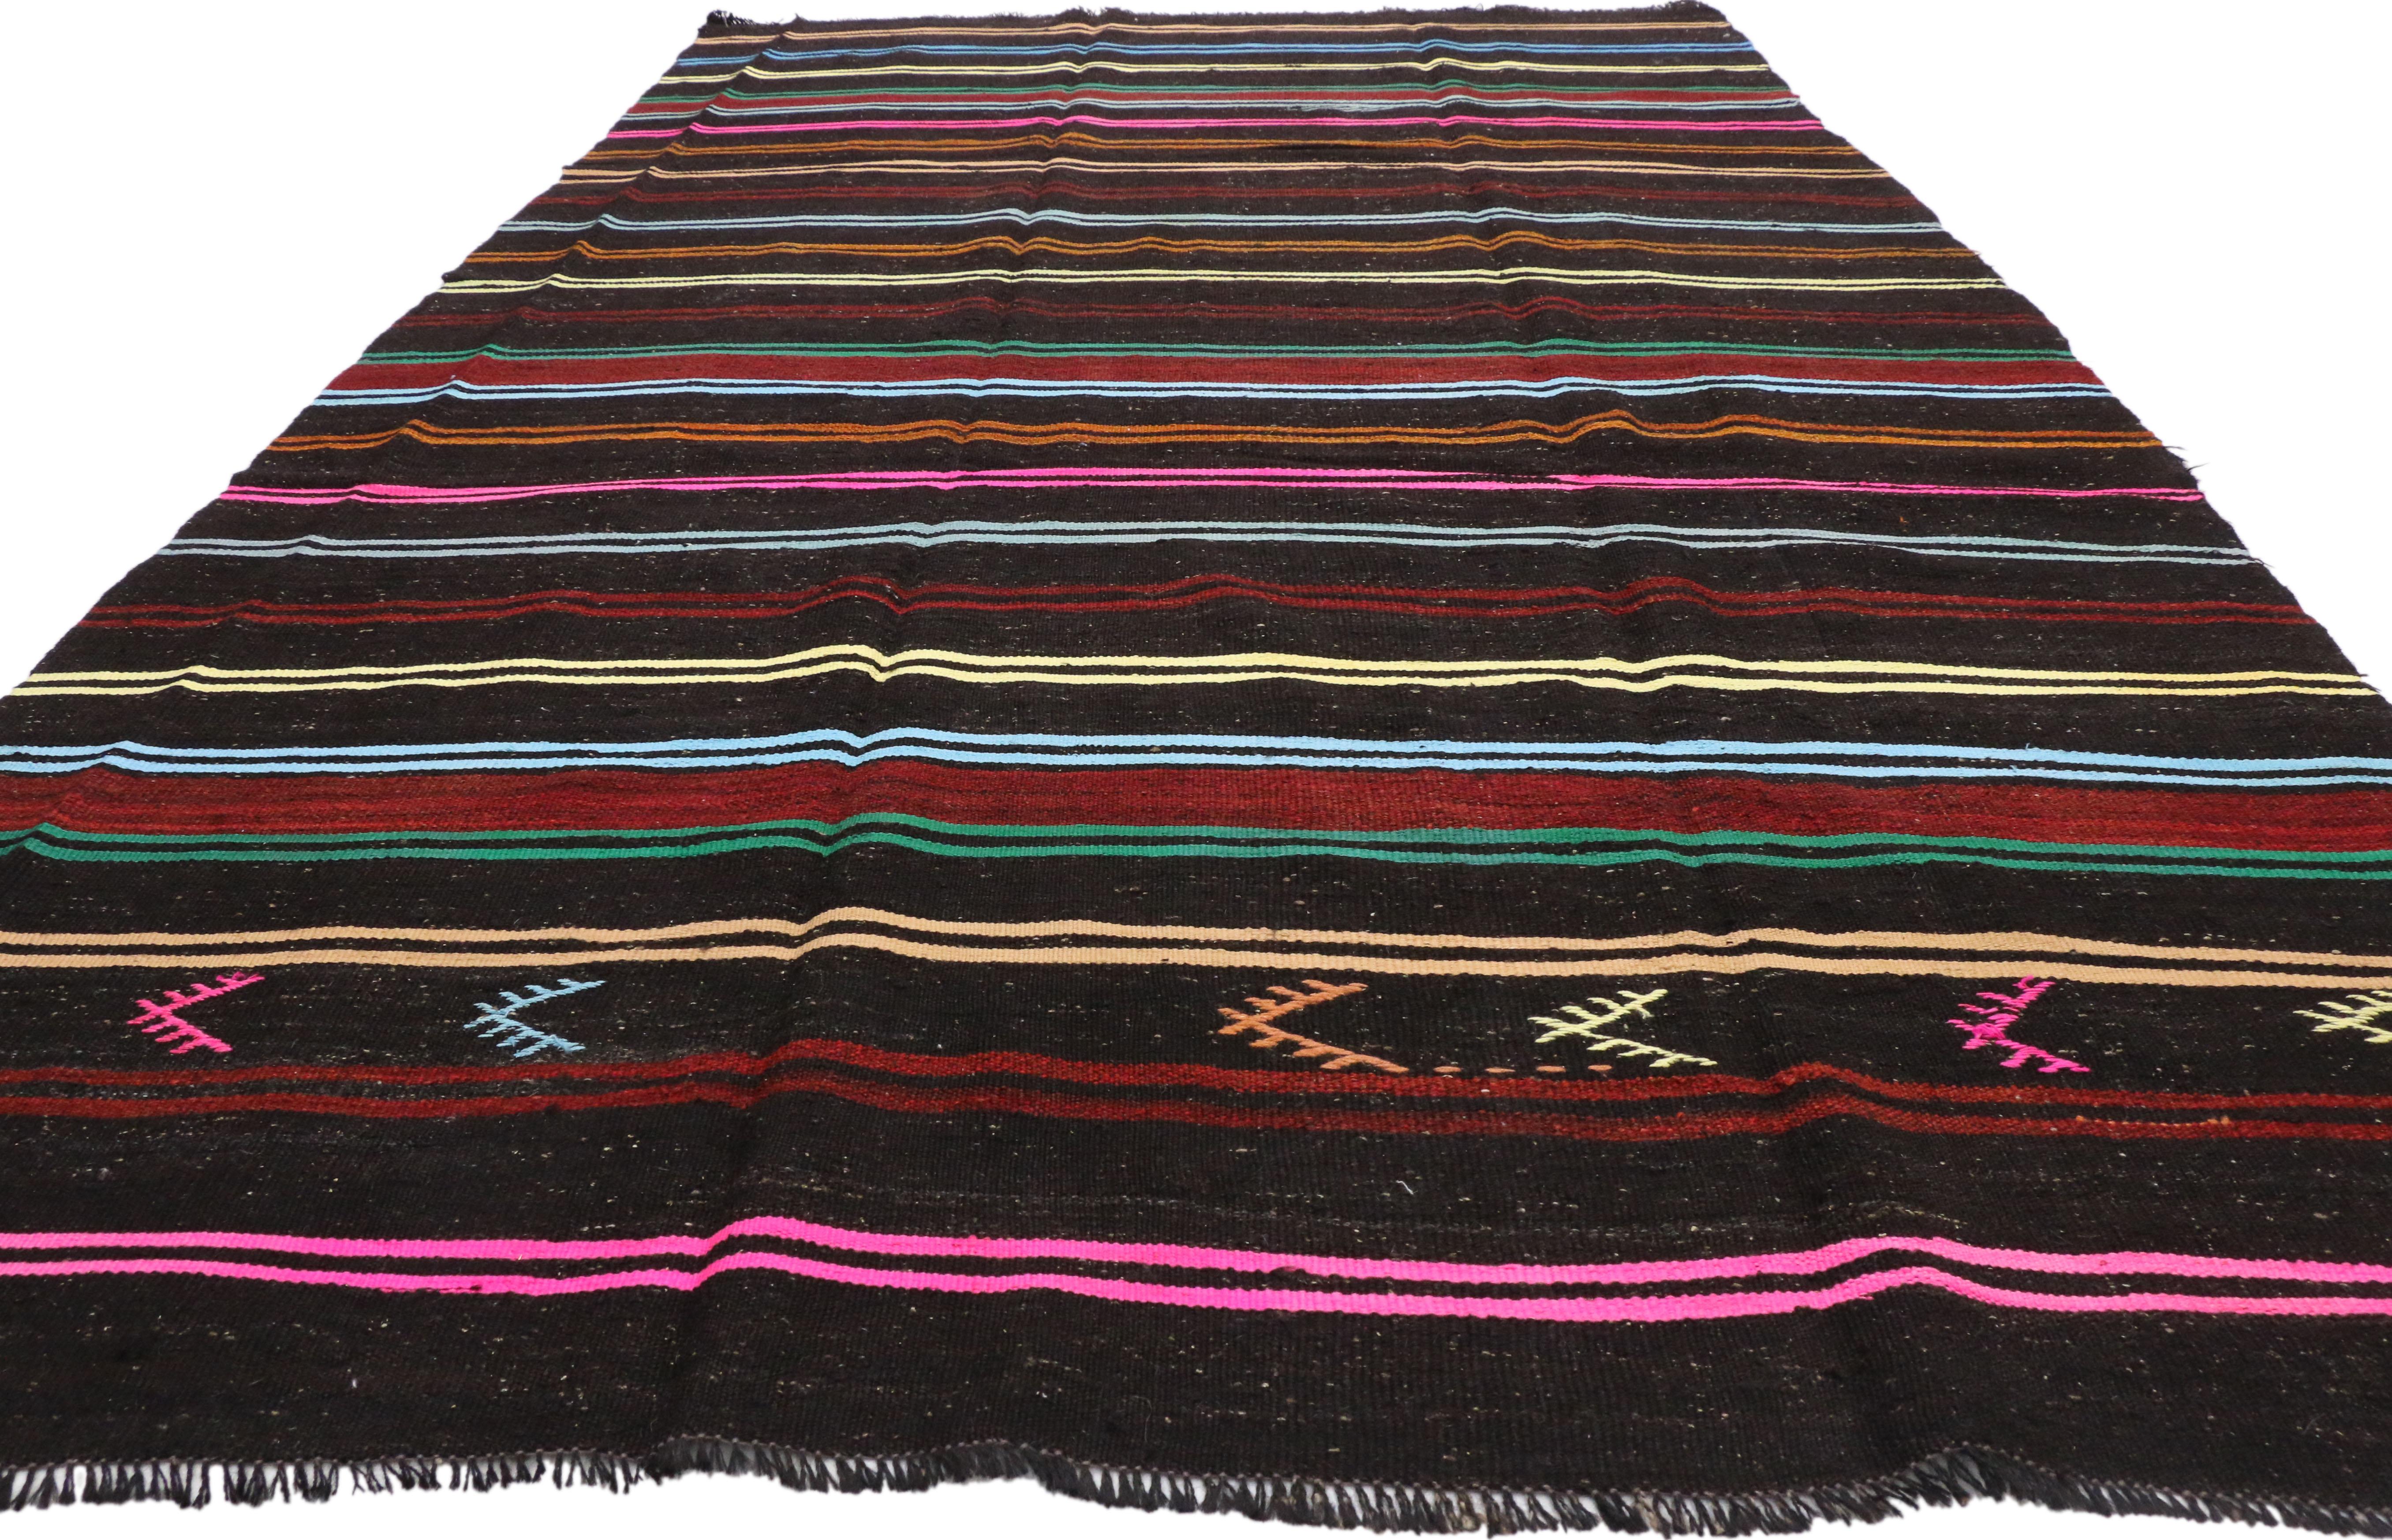 Hand-Woven Vintage Turkish Kilim with Tribal Style, Flat-weave Striped Kilim Area Rug For Sale